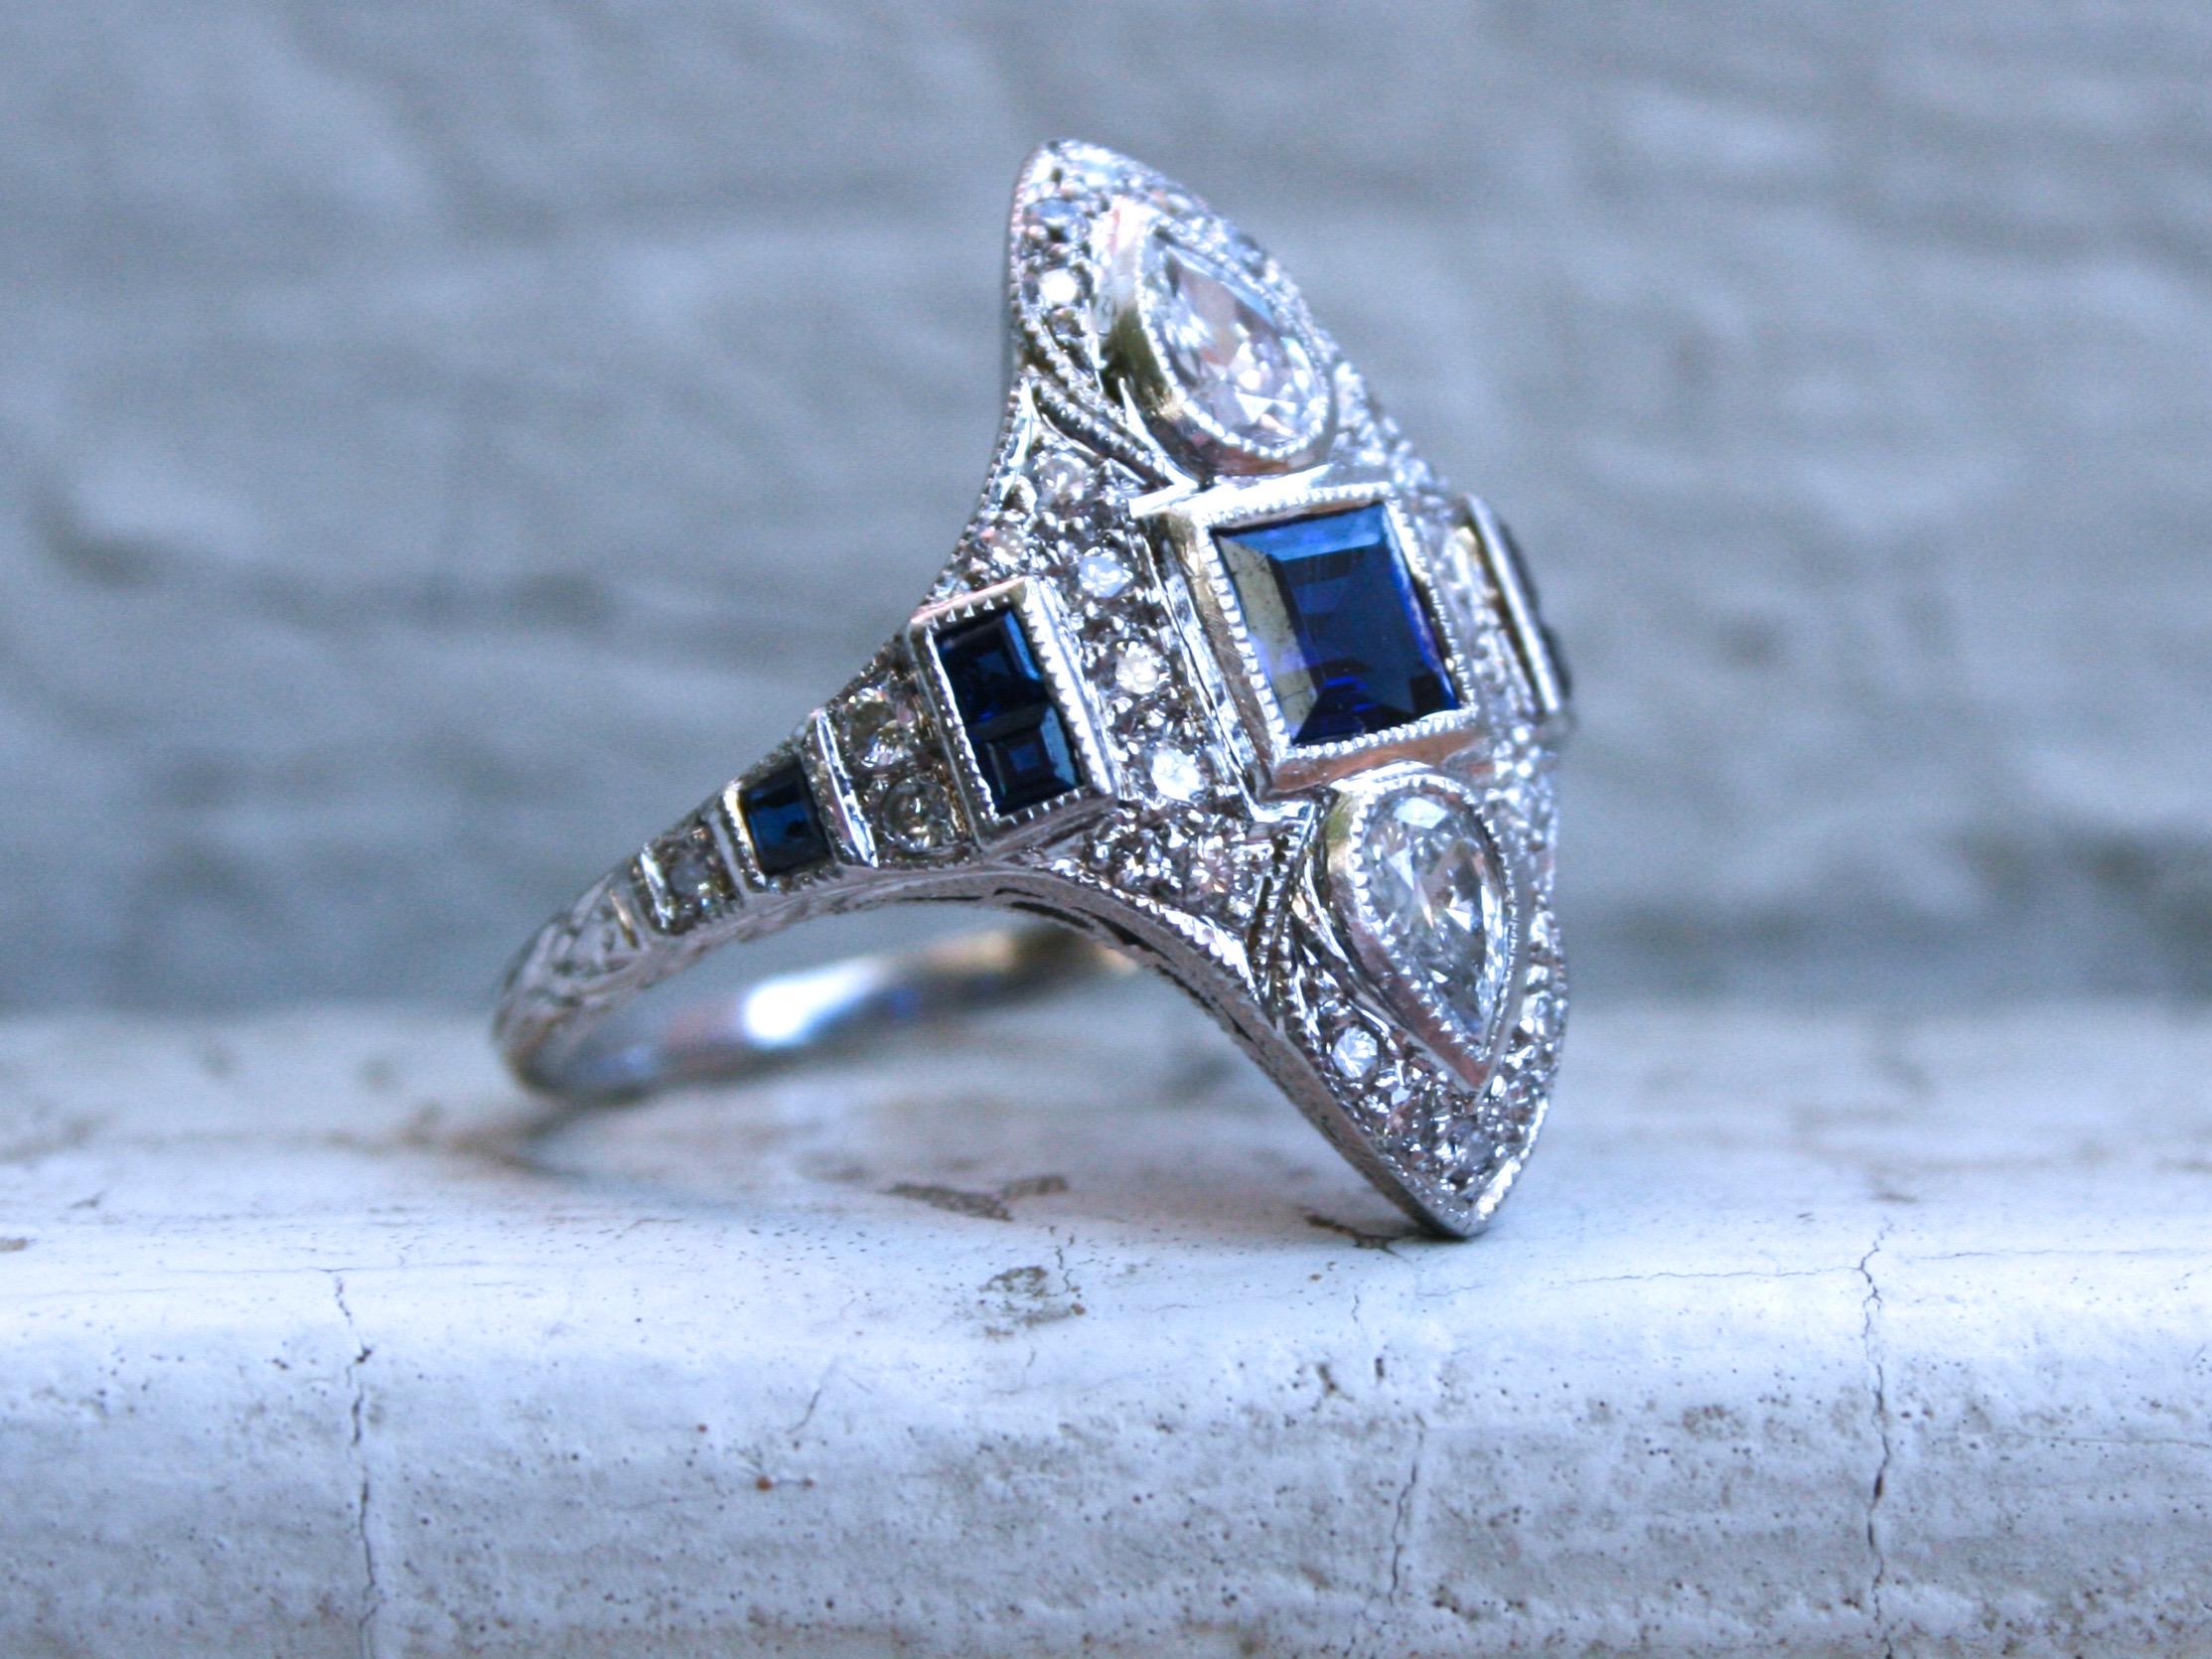 LOVE LOVE LOVE!! This Stunning Art Deco Style Diamond and Sapphire Navette Ring is just a masterpiece! Crafted in Platinum, this Deco Style Geometric design features Pave Diamonds, Fantastic Sapphires, great Pear Cut Diamonds, and amazing hand